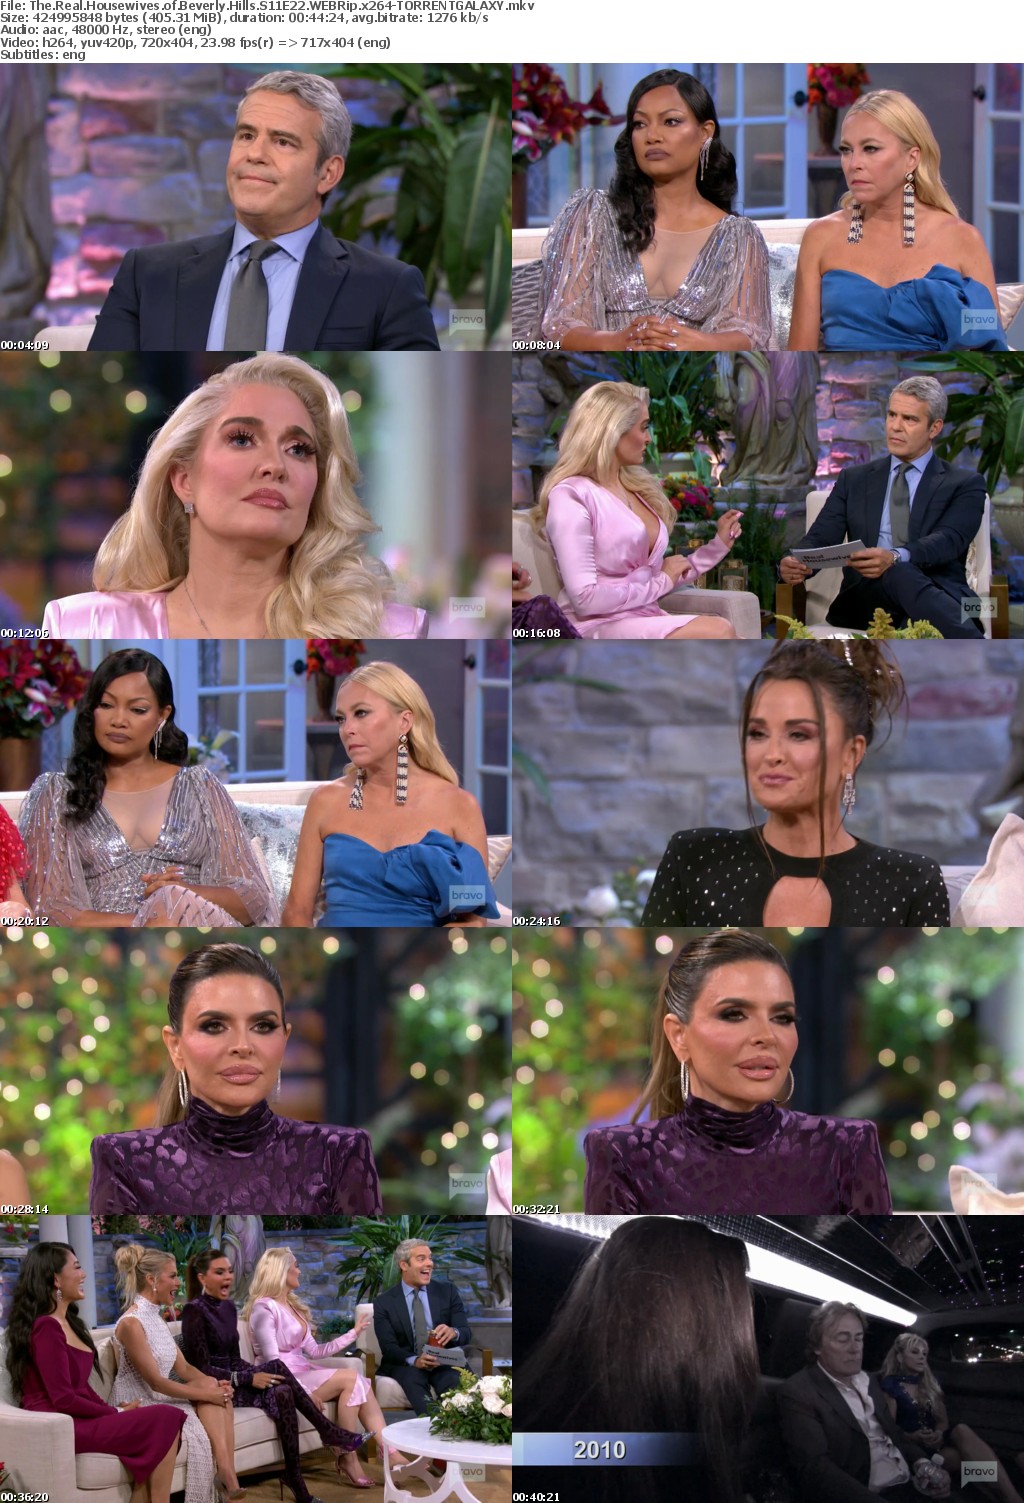 The Real Housewives of Beverly Hills S11E22 WEBRip x264-GALAXY